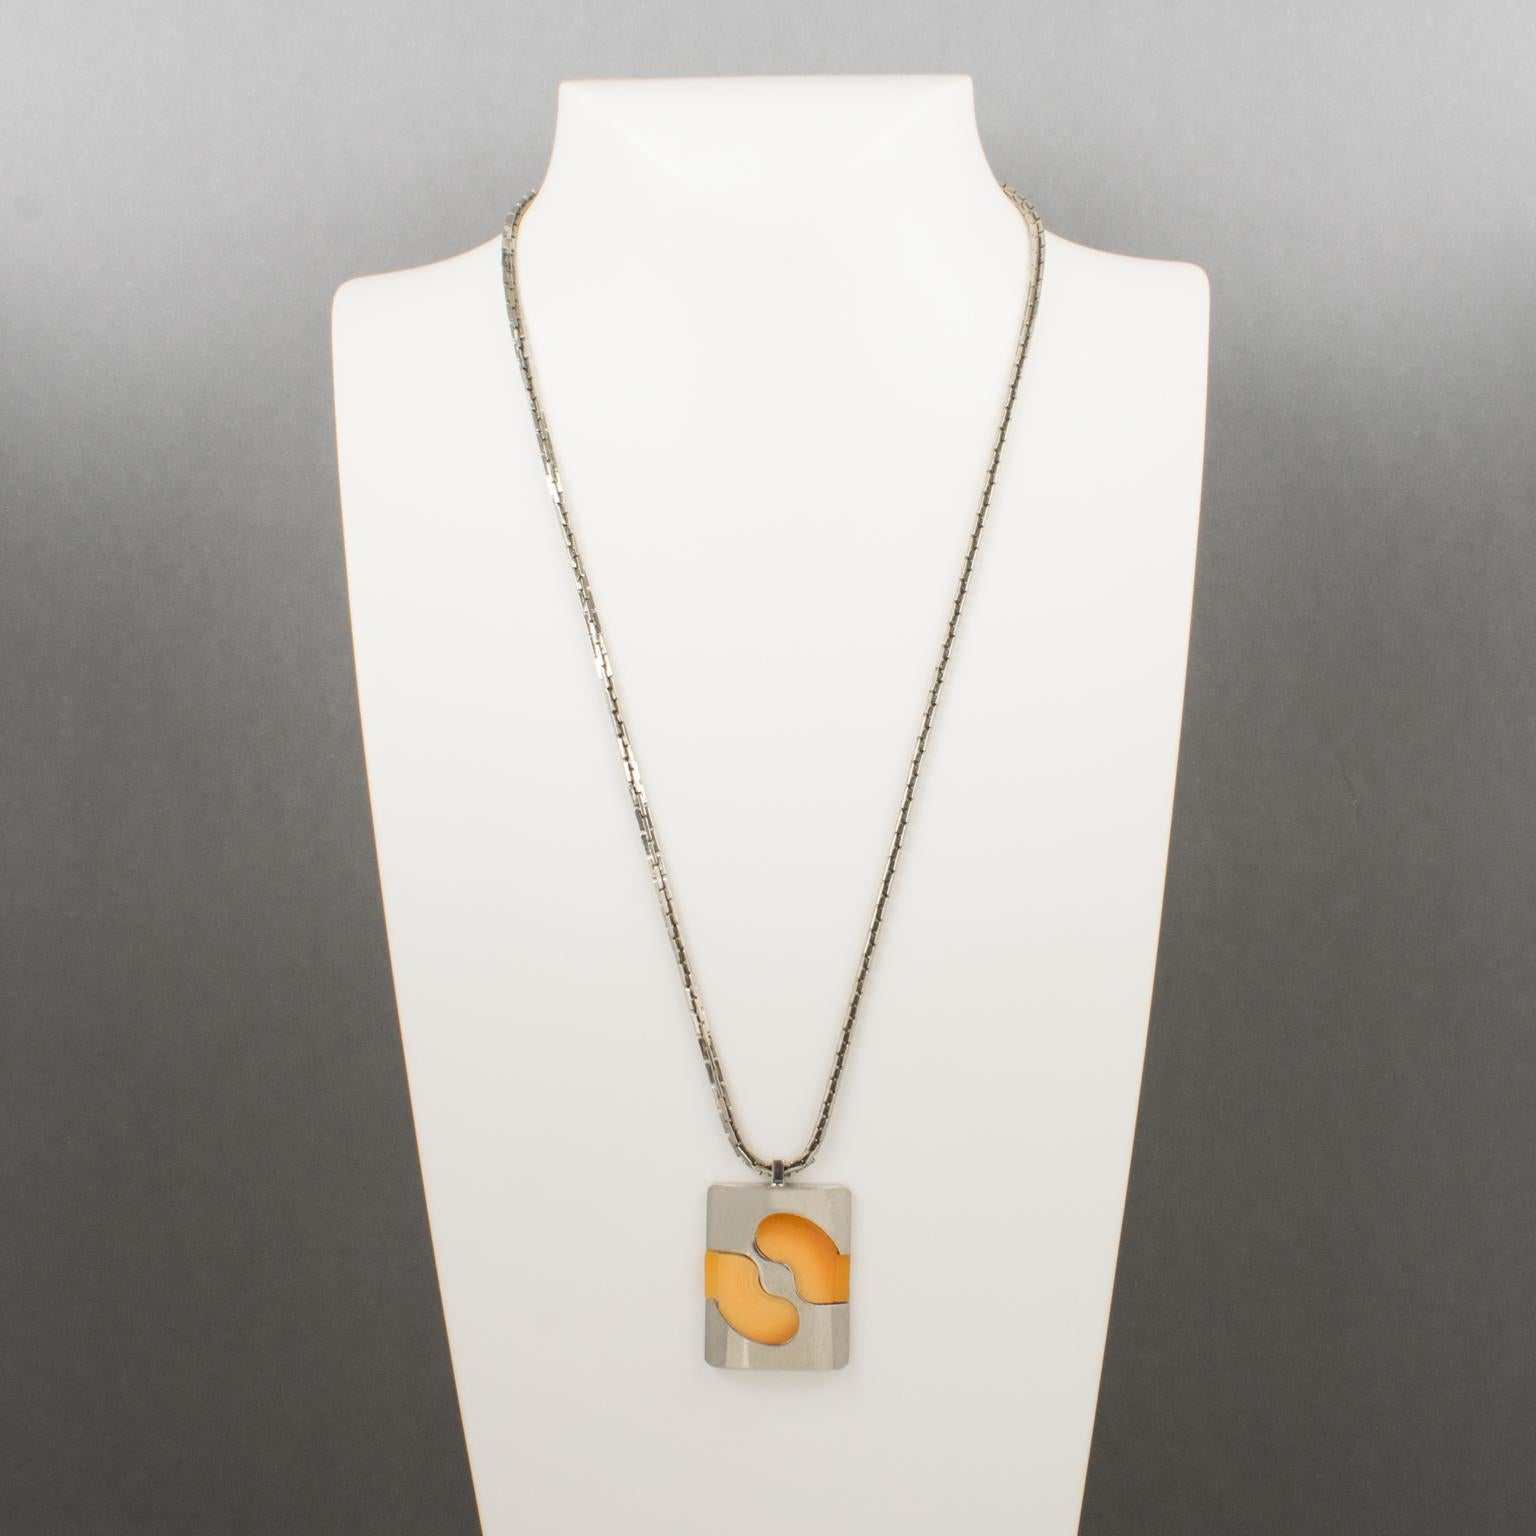 Pierre Cardin Modernist Silvered  and Yellow Resin Pendant Necklace, 1970s In Good Condition For Sale In Atlanta, GA